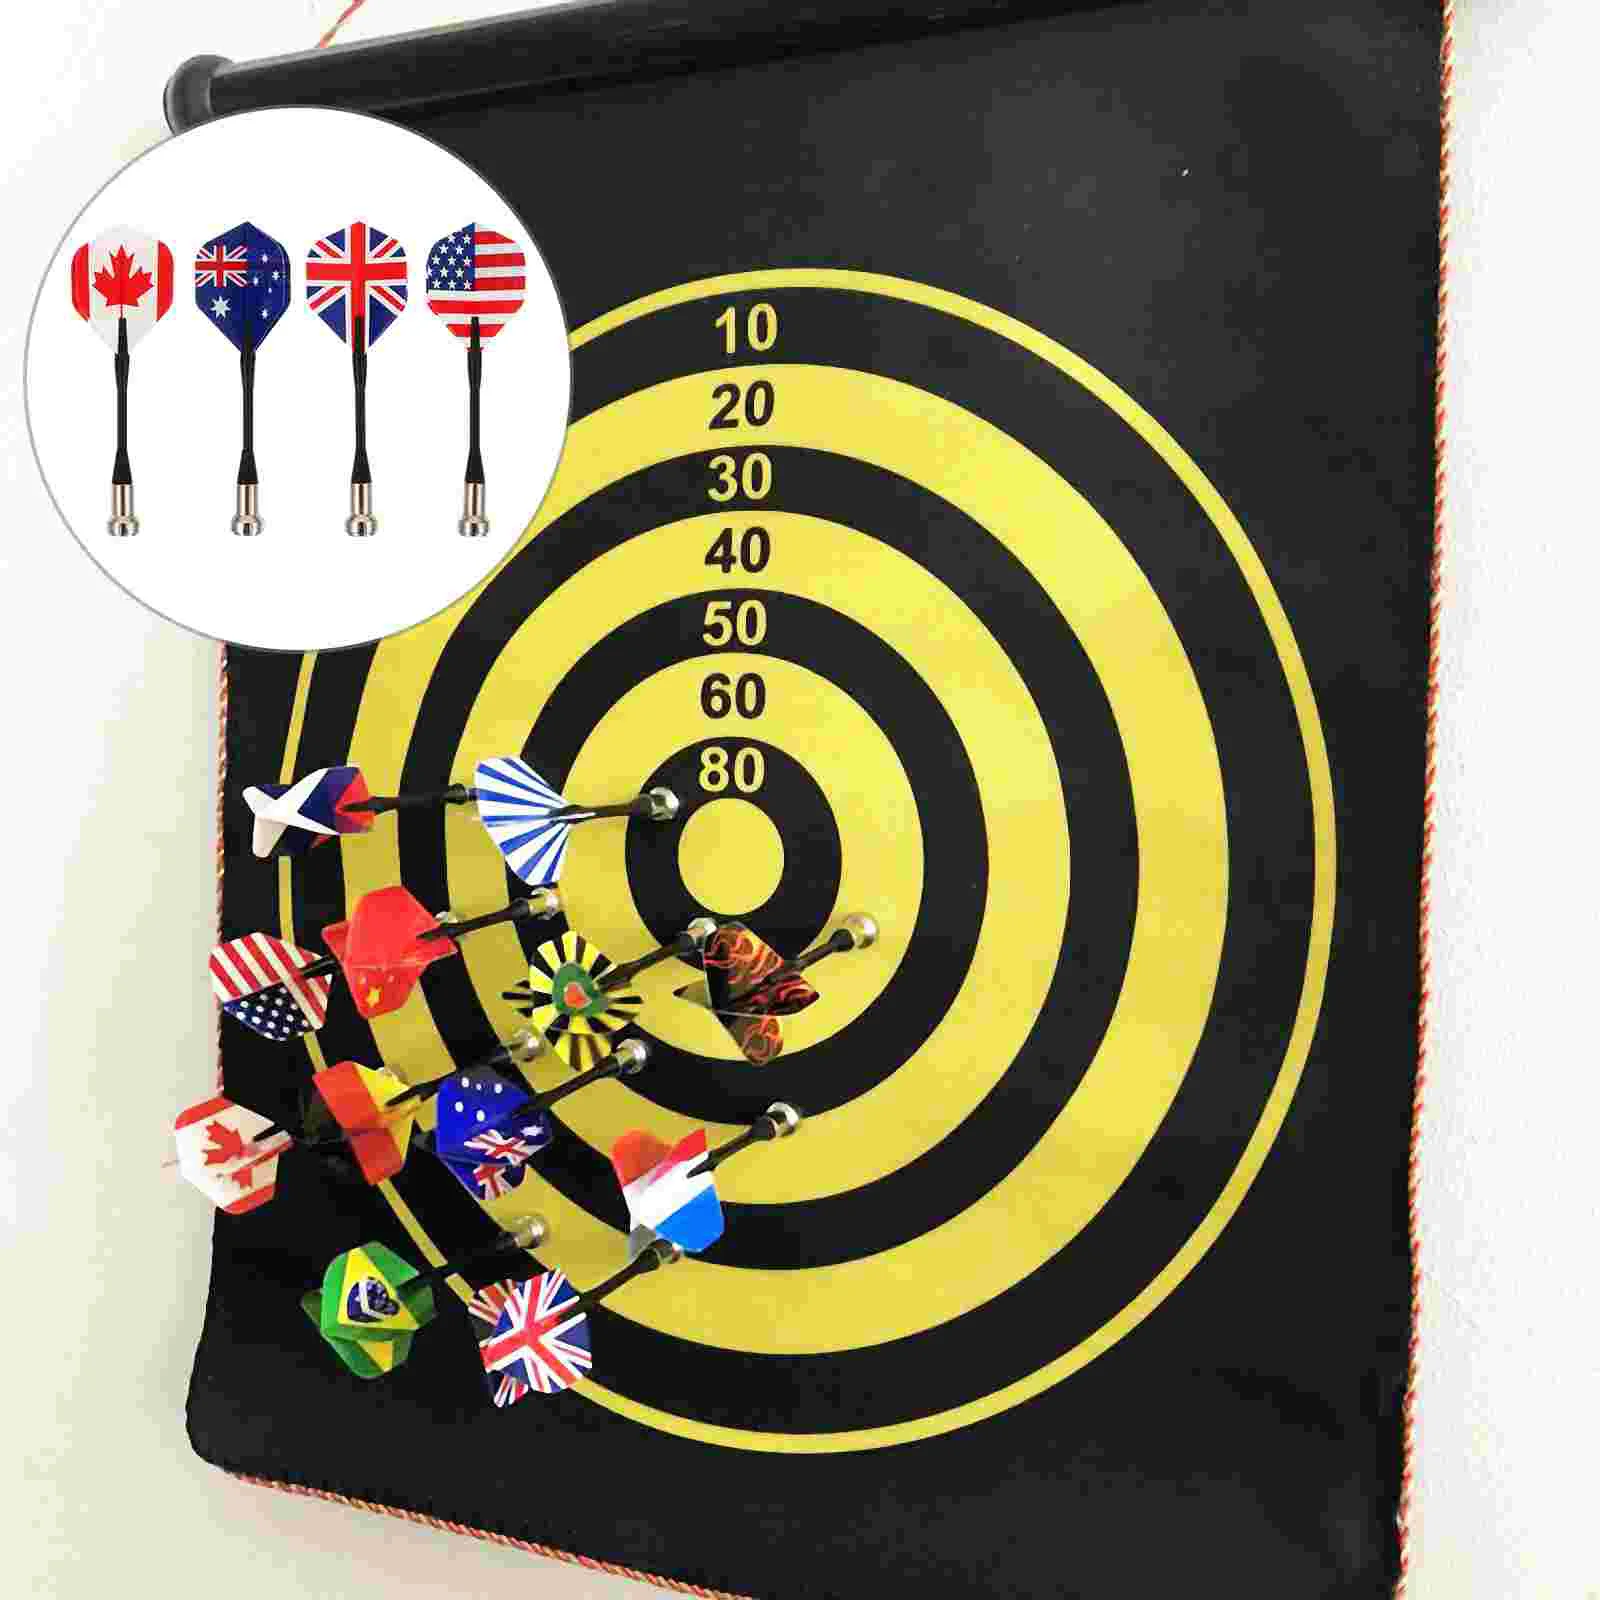 12 Pcs Flag Replacement Metal Safety Magnet Kids Toys Game Kidcraft Playset Pattern Magnetic Outdoor